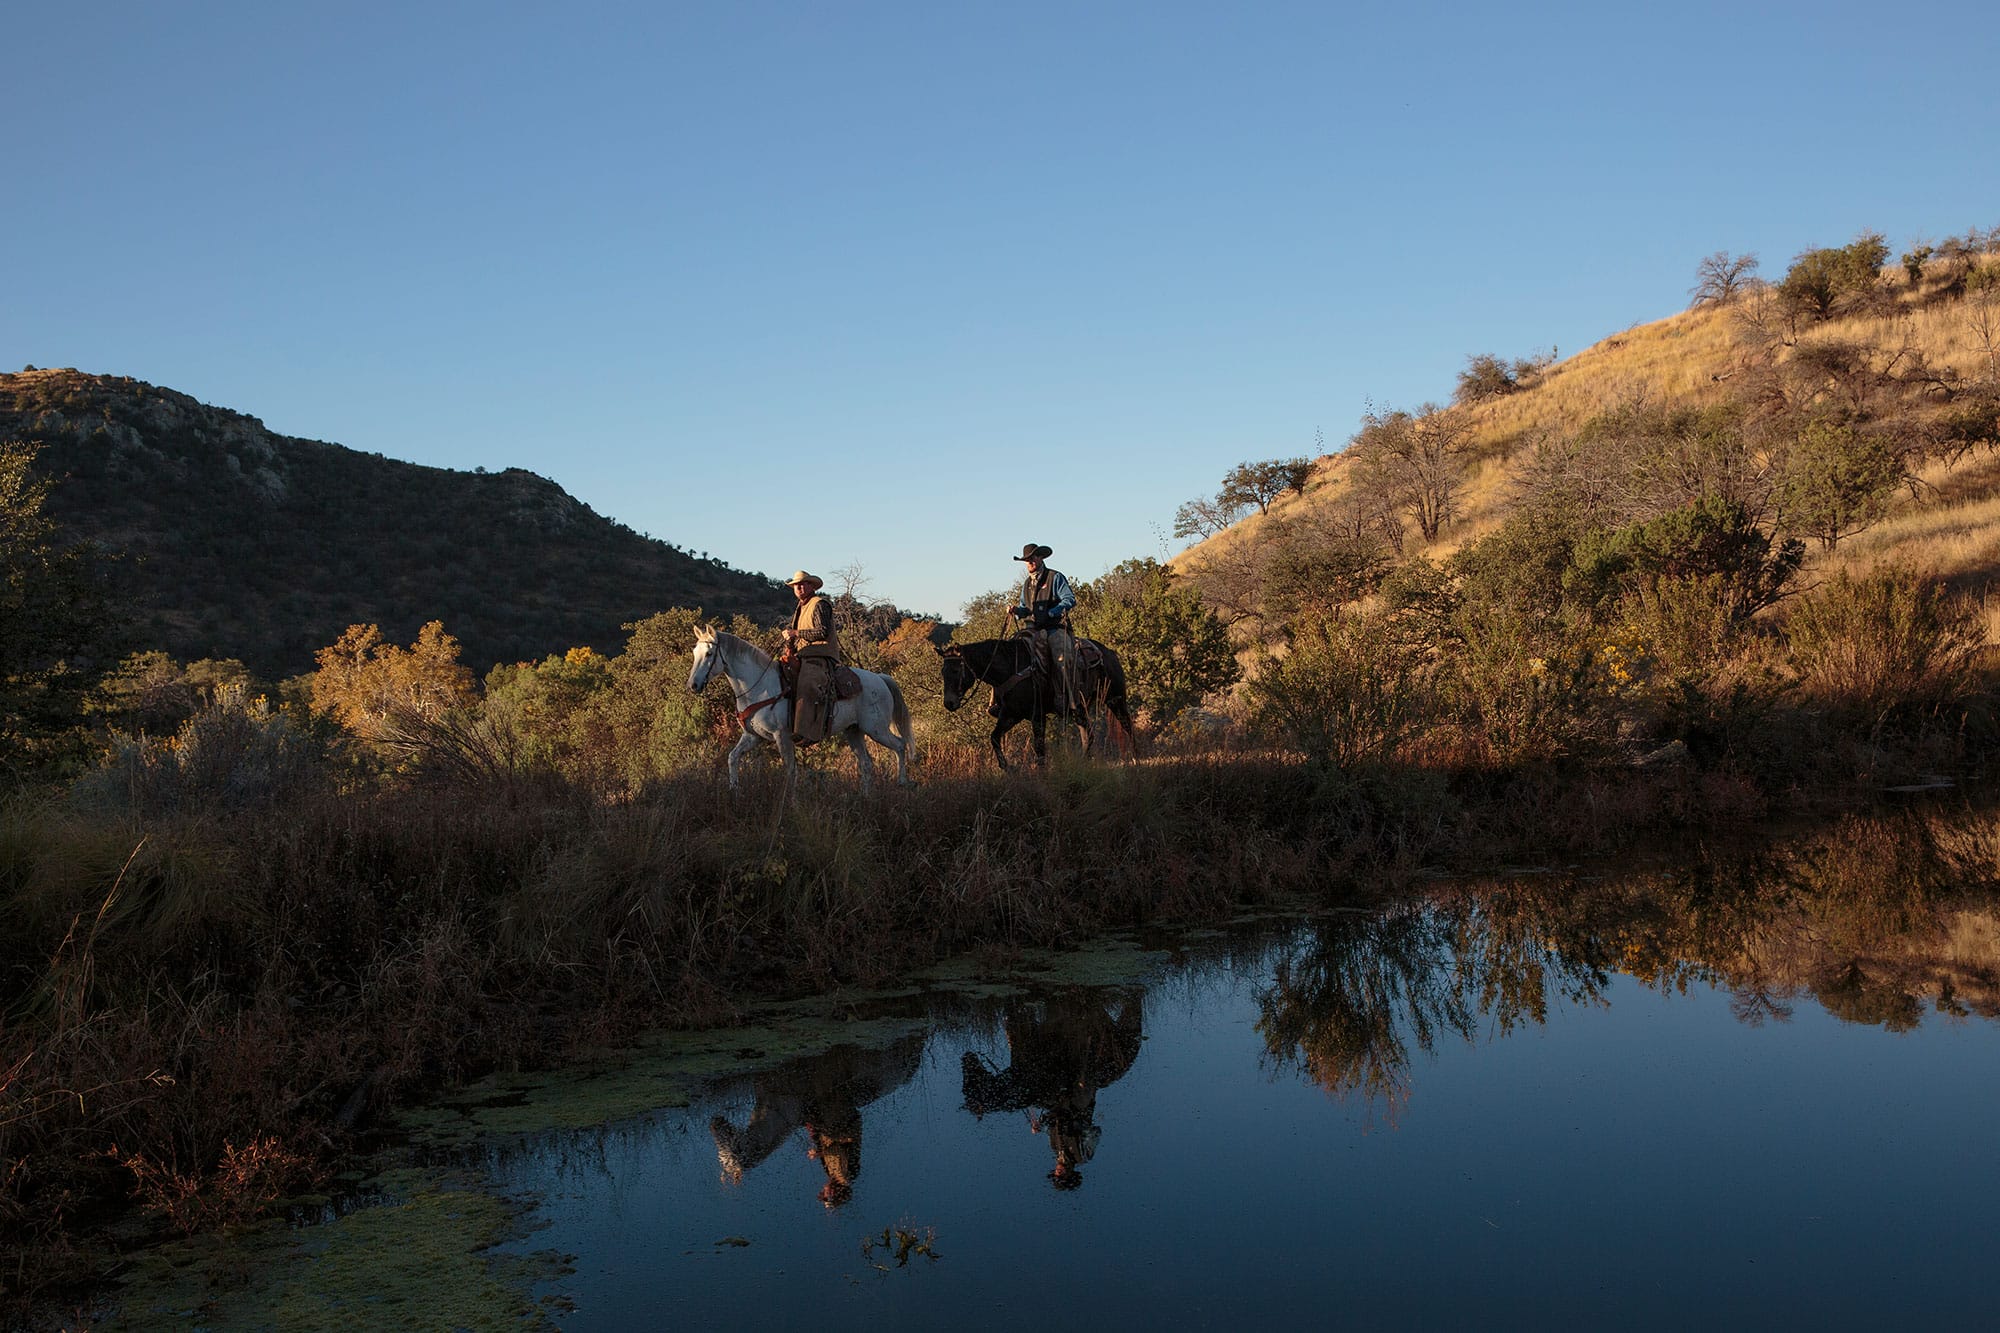 Two people riding horses near a pond.